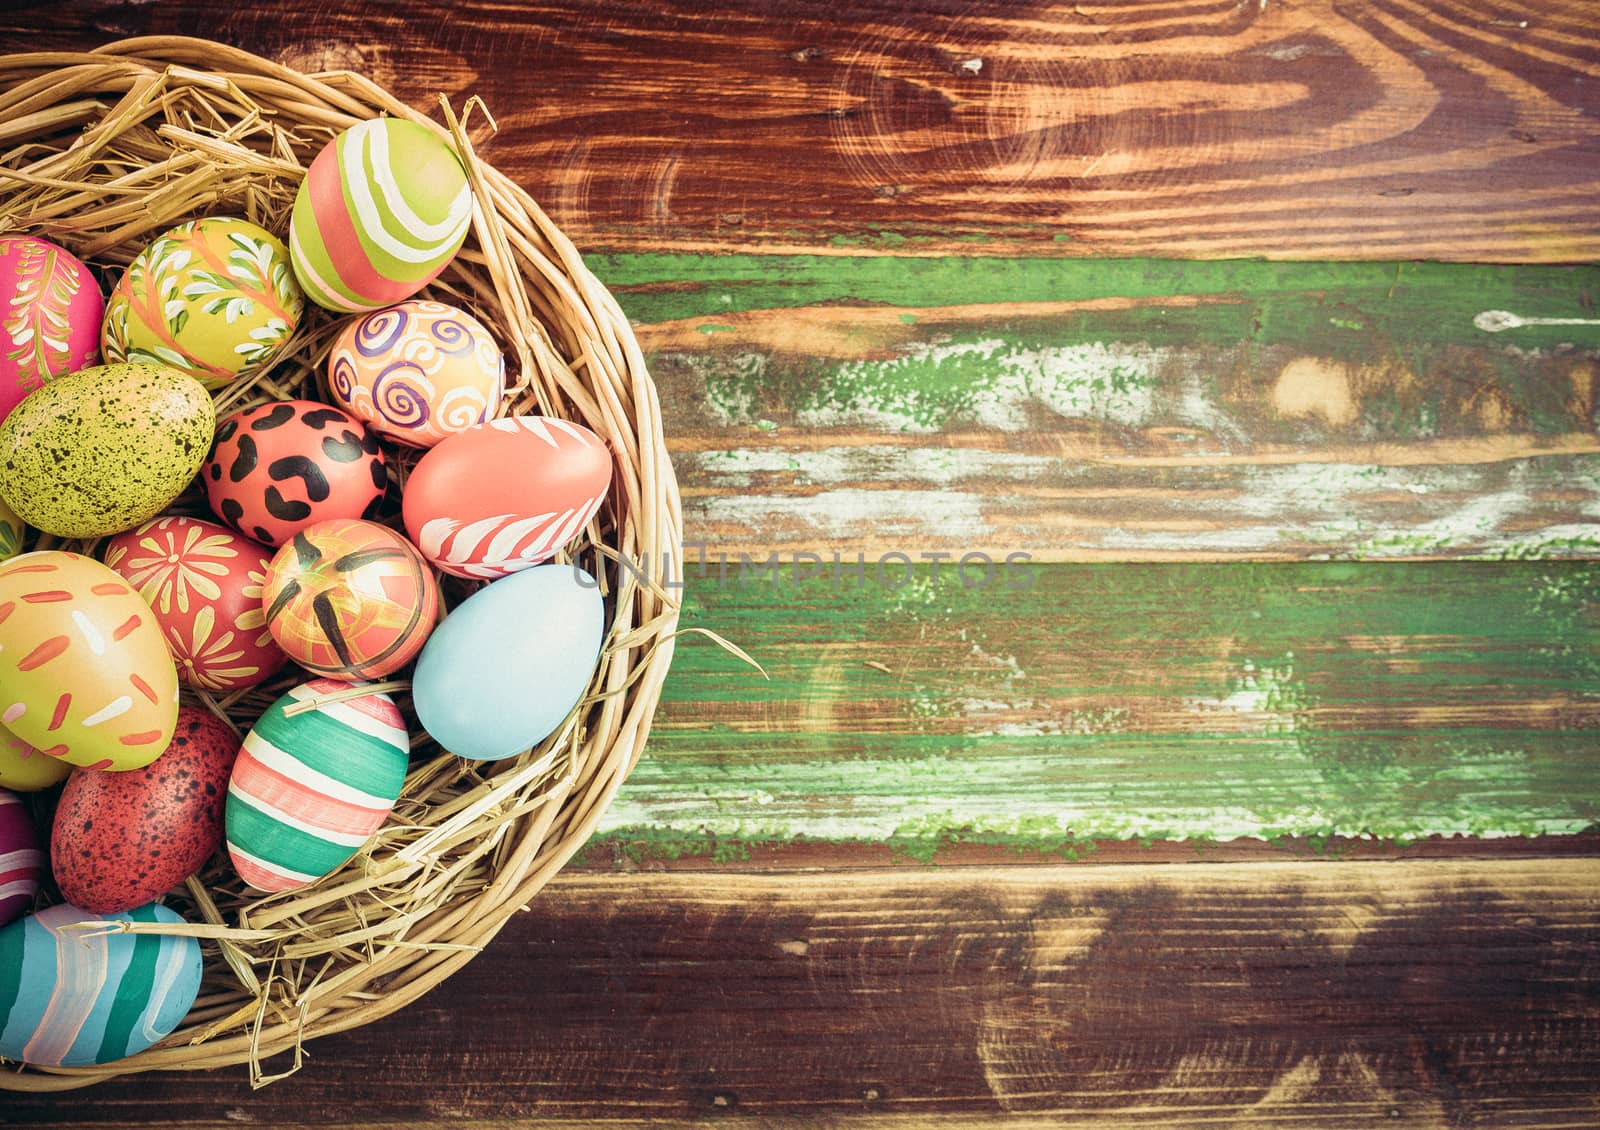 Easter eggs in various patterns and colors in a bird's nest placed on a wooden floor decorated in retro style.